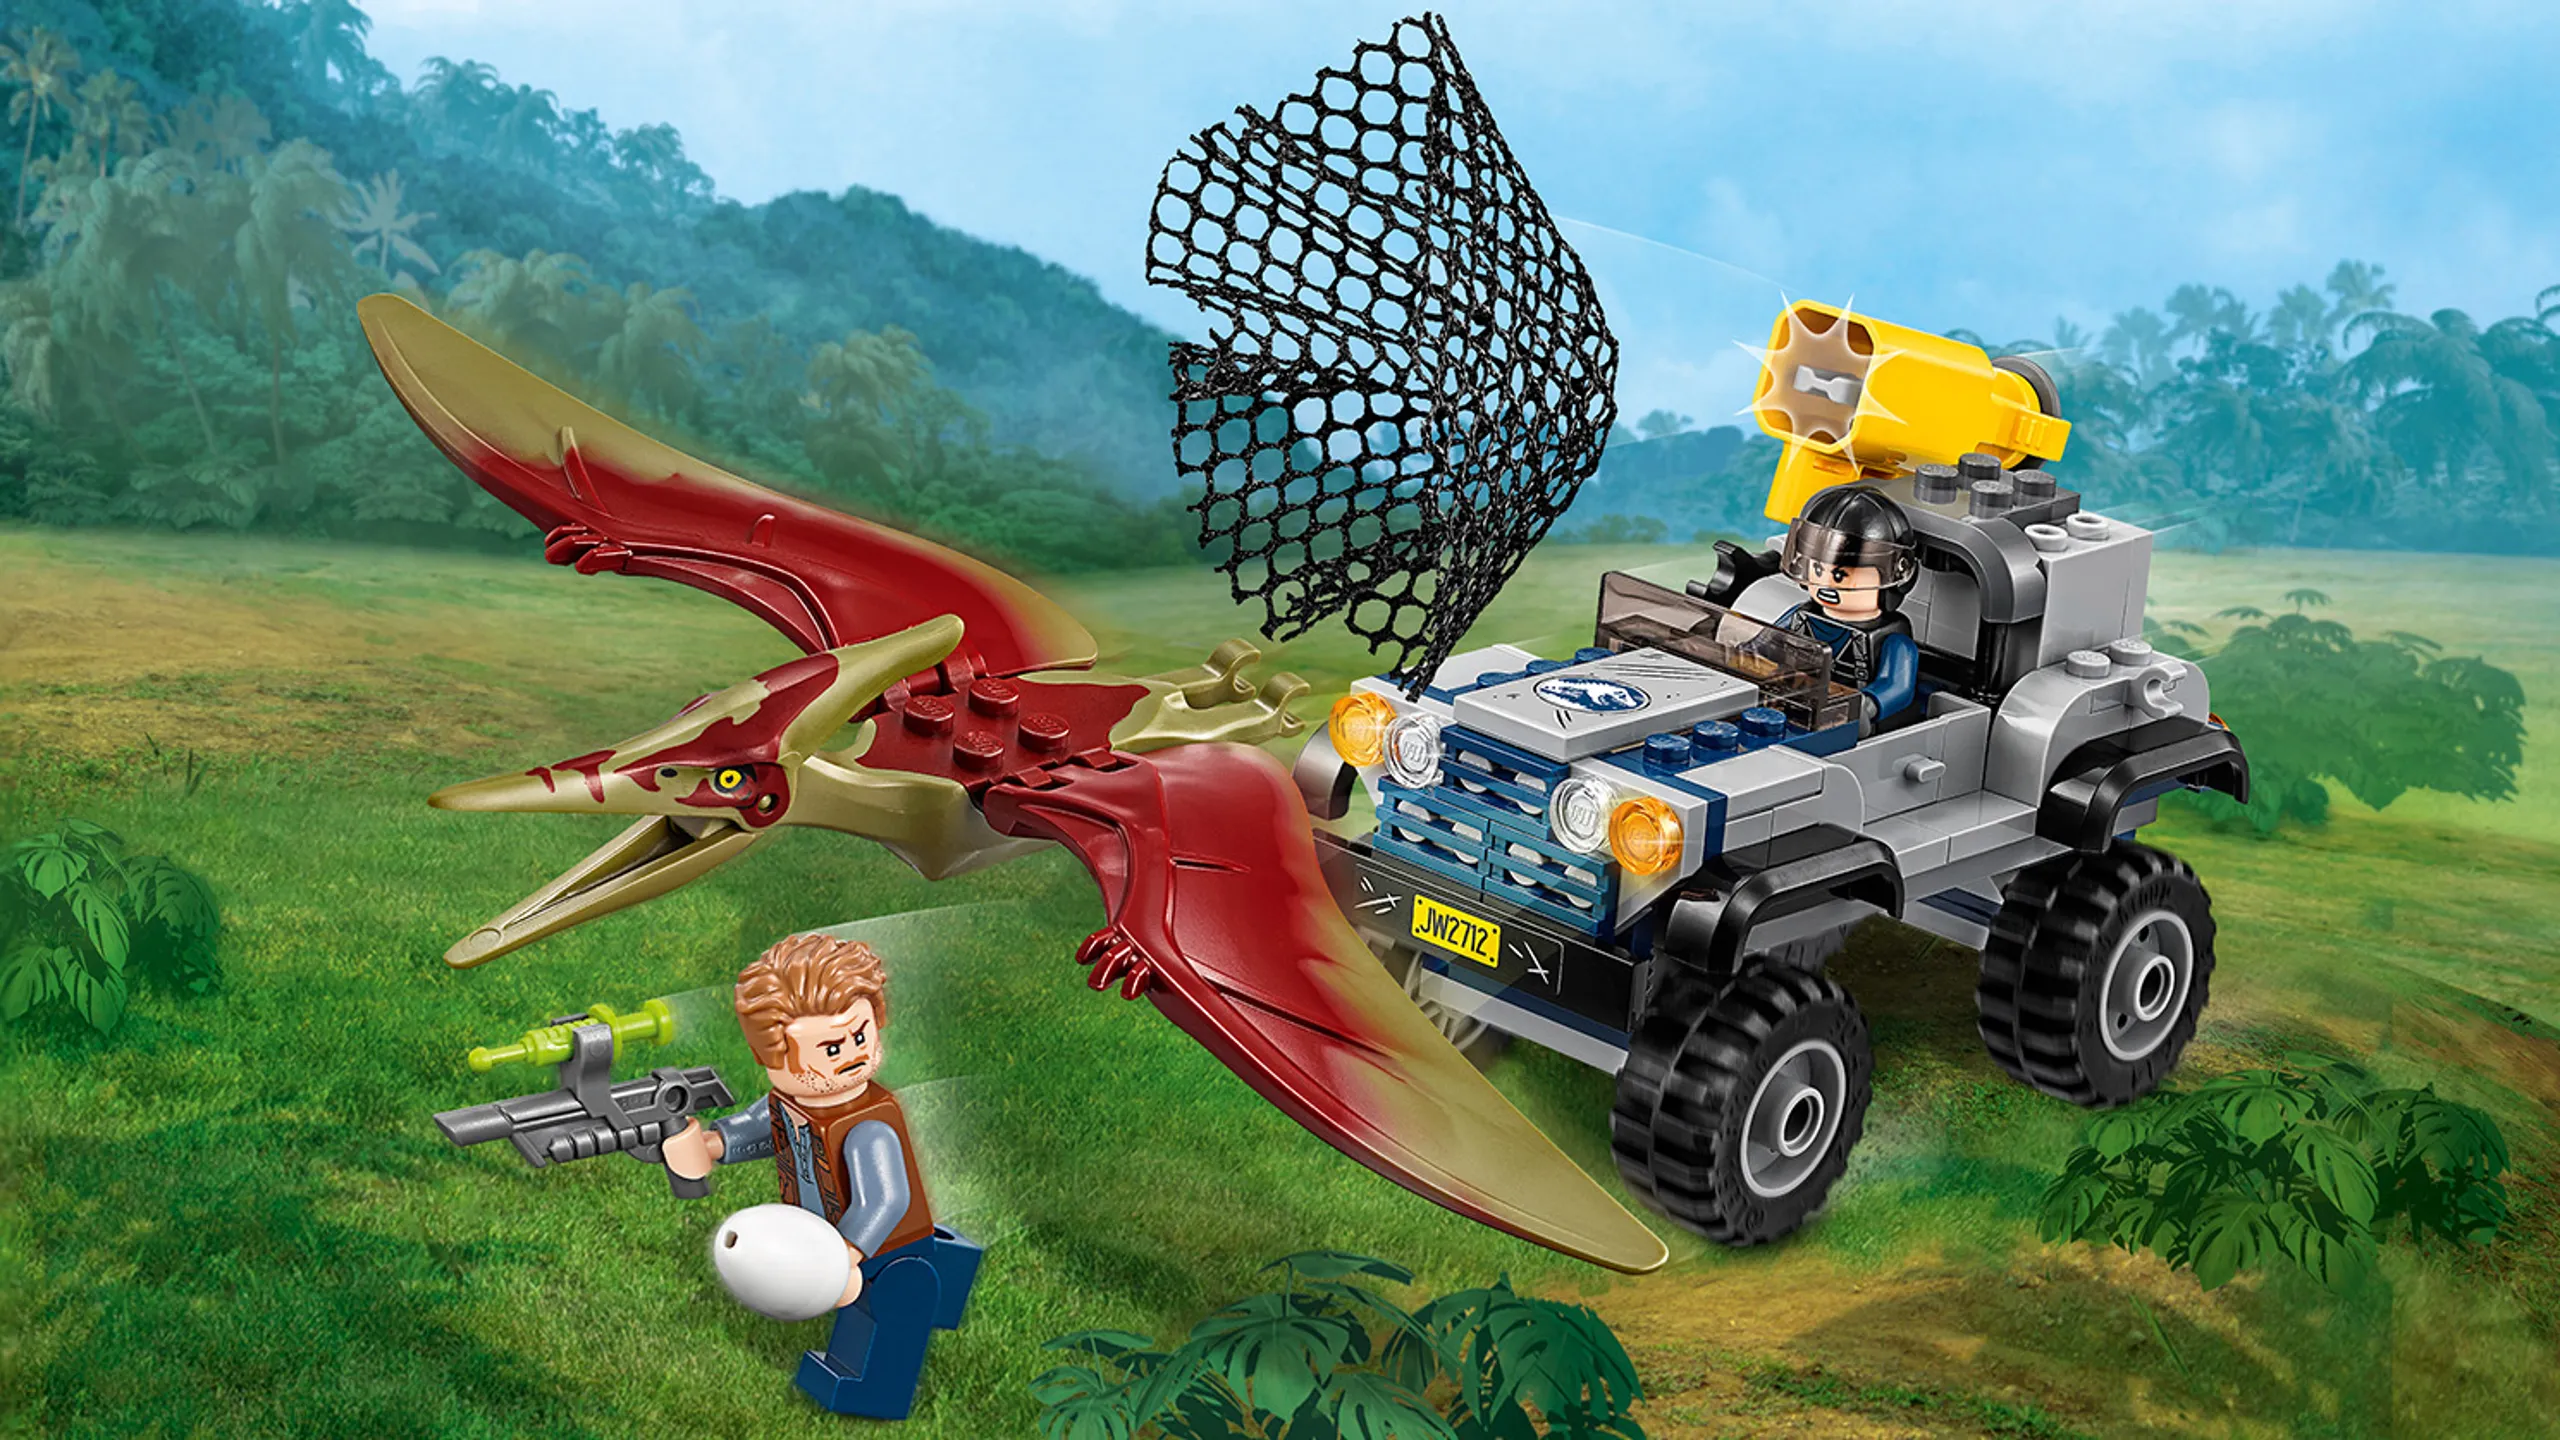 Here's the Lego Jurassic World You've Been Waiting For